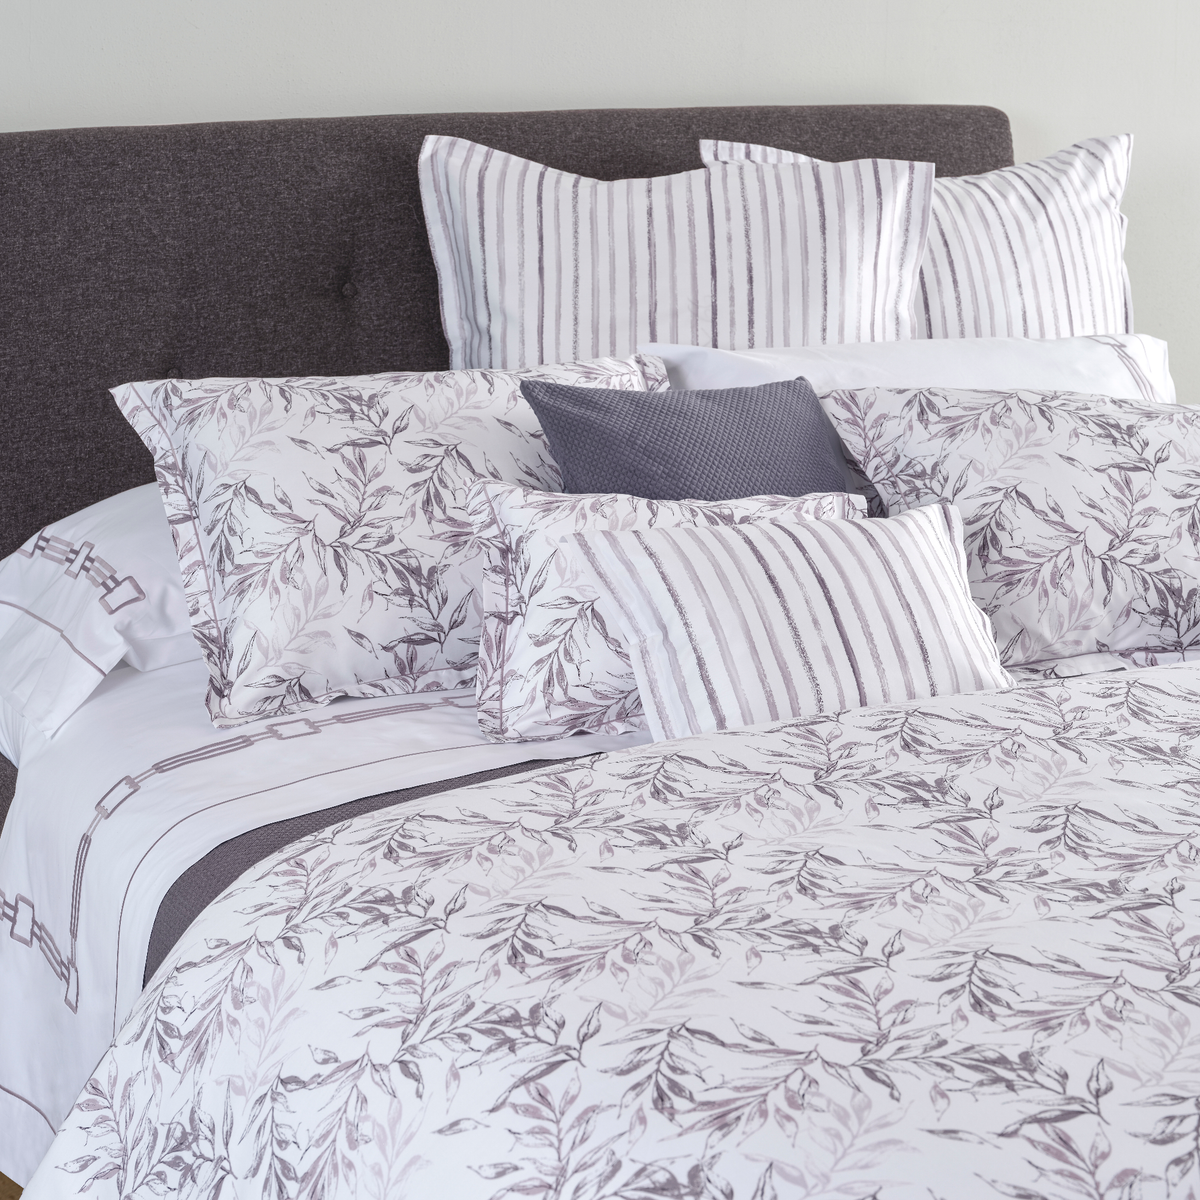 Side View of Signoria Natura Bedding in Thistle Color with Complimentary Collections